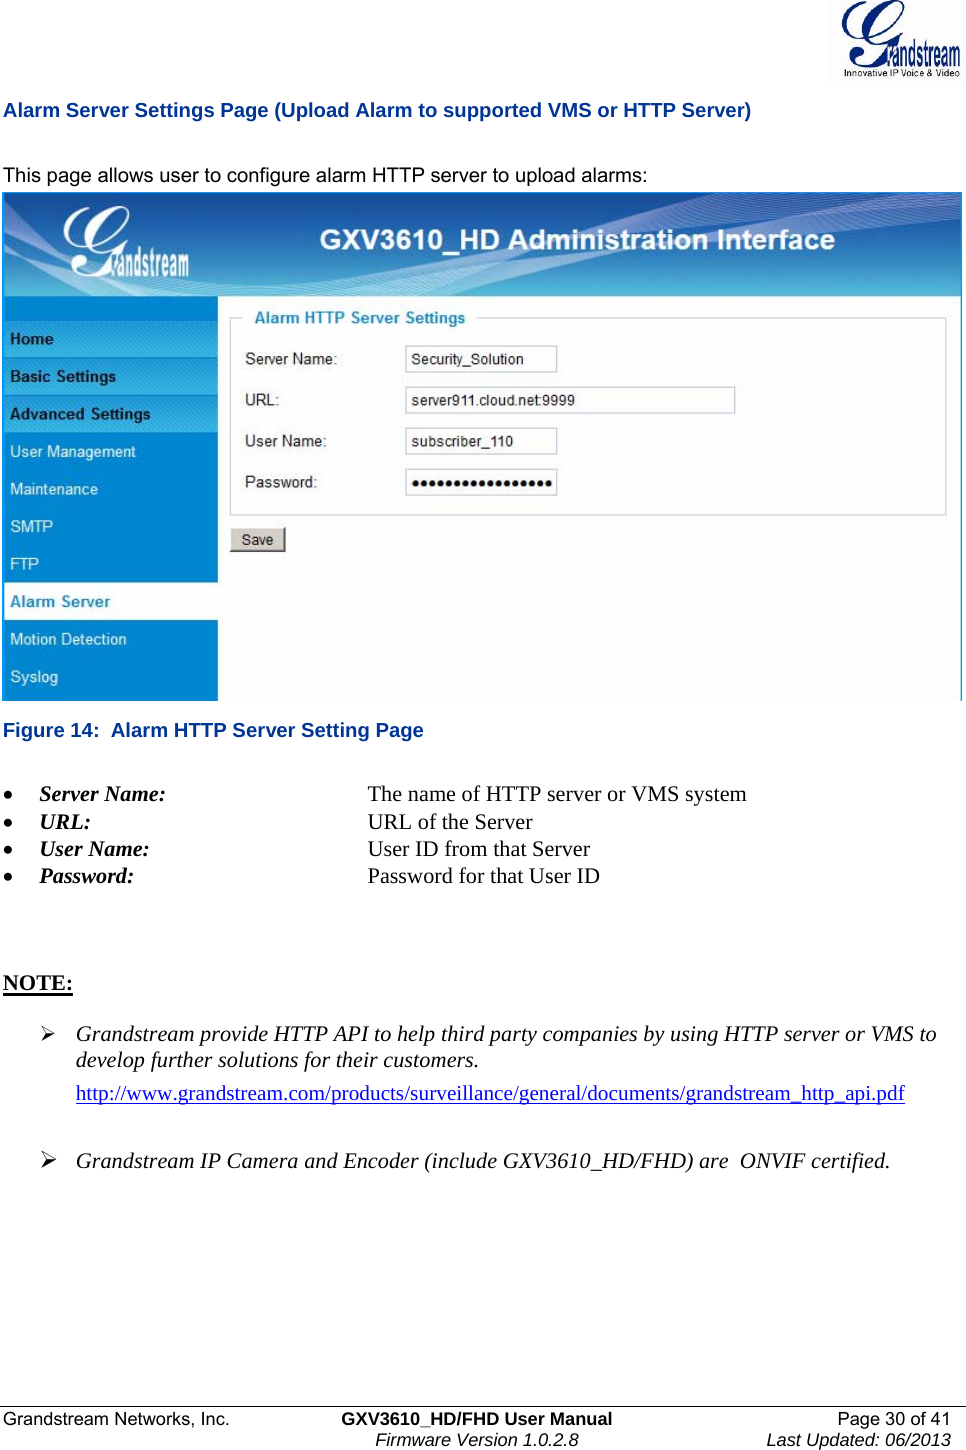  Grandstream Networks, Inc.  GXV3610_HD/FHD User Manual  Page 30 of 41    Firmware Version 1.0.2.8  Last Updated: 06/2013  Alarm Server Settings Page (Upload Alarm to supported VMS or HTTP Server)  This page allows user to configure alarm HTTP server to upload alarms:  Figure 14:  Alarm HTTP Server Setting Page  • Server Name:       The name of HTTP server or VMS system • URL:         URL of the Server • User Name:       User ID from that Server • Password:        Password for that User ID    NOTE:   ¾ Grandstream provide HTTP API to help third party companies by using HTTP server or VMS to develop further solutions for their customers.  http://www.grandstream.com/products/surveillance/general/documents/grandstream_http_api.pdf   ¾ Grandstream IP Camera and Encoder (include GXV3610_HD/FHD) are  ONVIF certified.         